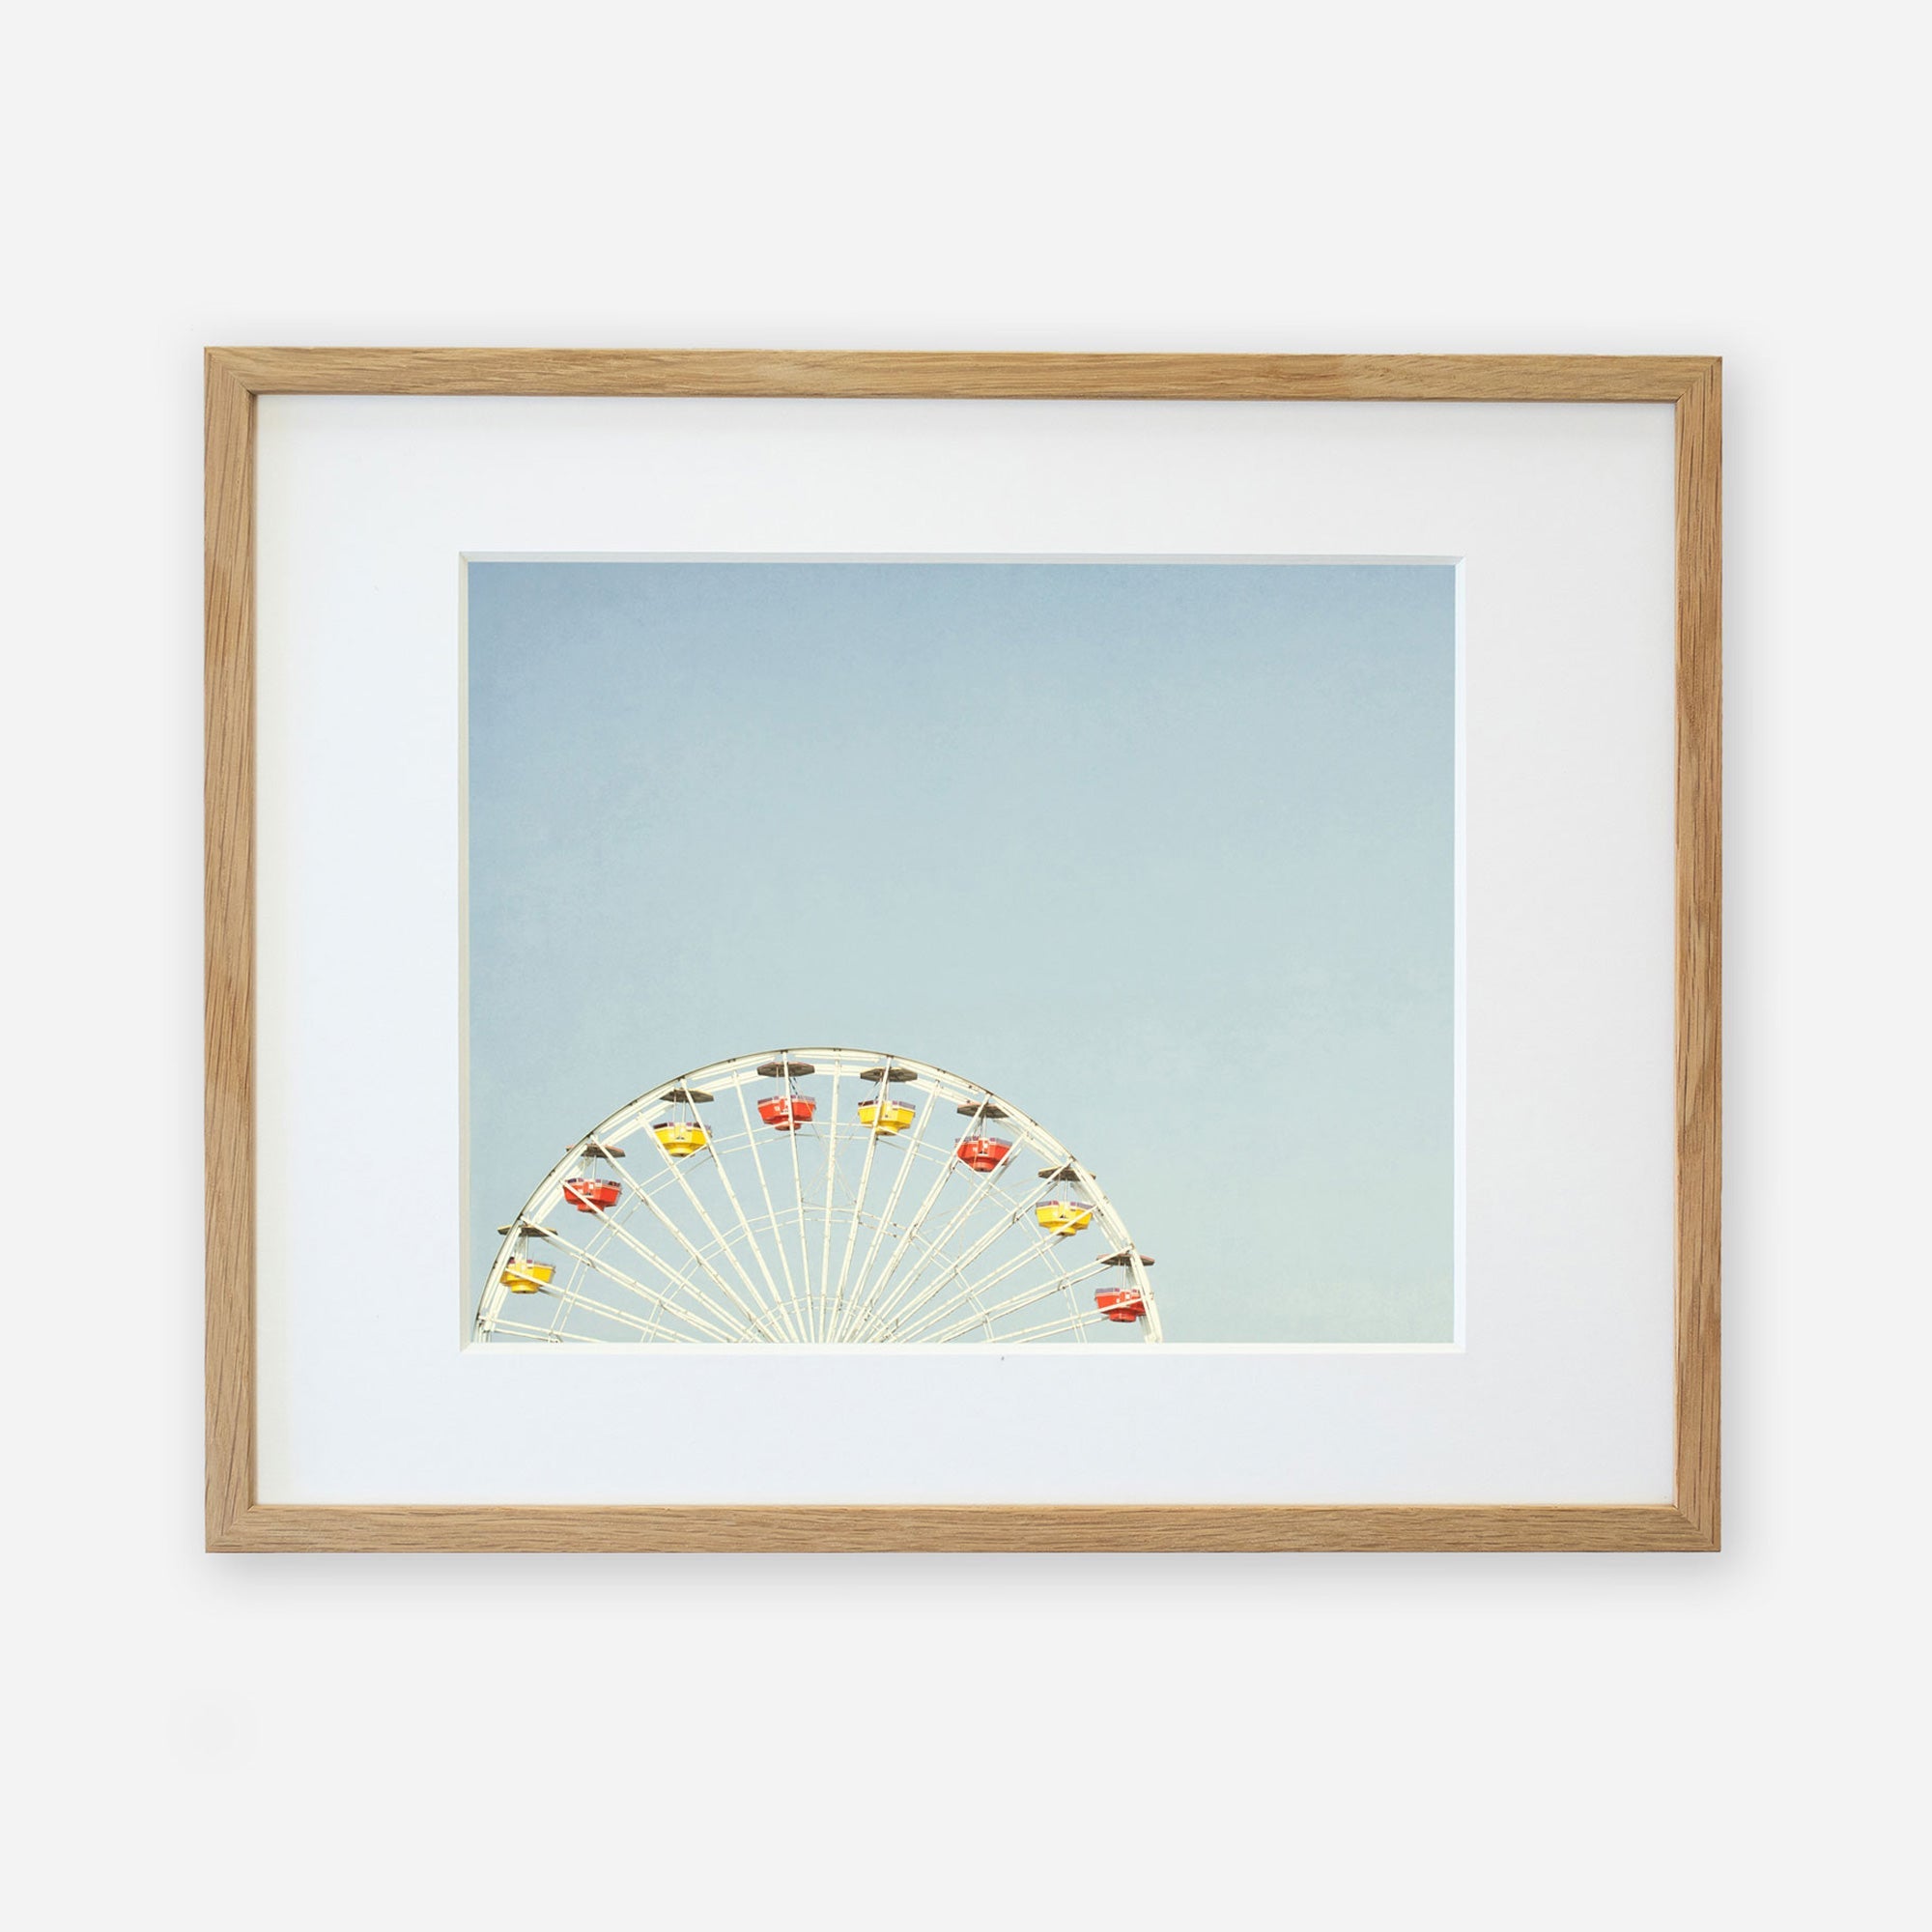 A framed photograph of Ferris Blue, the Santa Monica Pier ferris wheel, partially visible at the bottom, against a light blue sky, displayed in a simple wooden frame with a white mat by Offley Green.